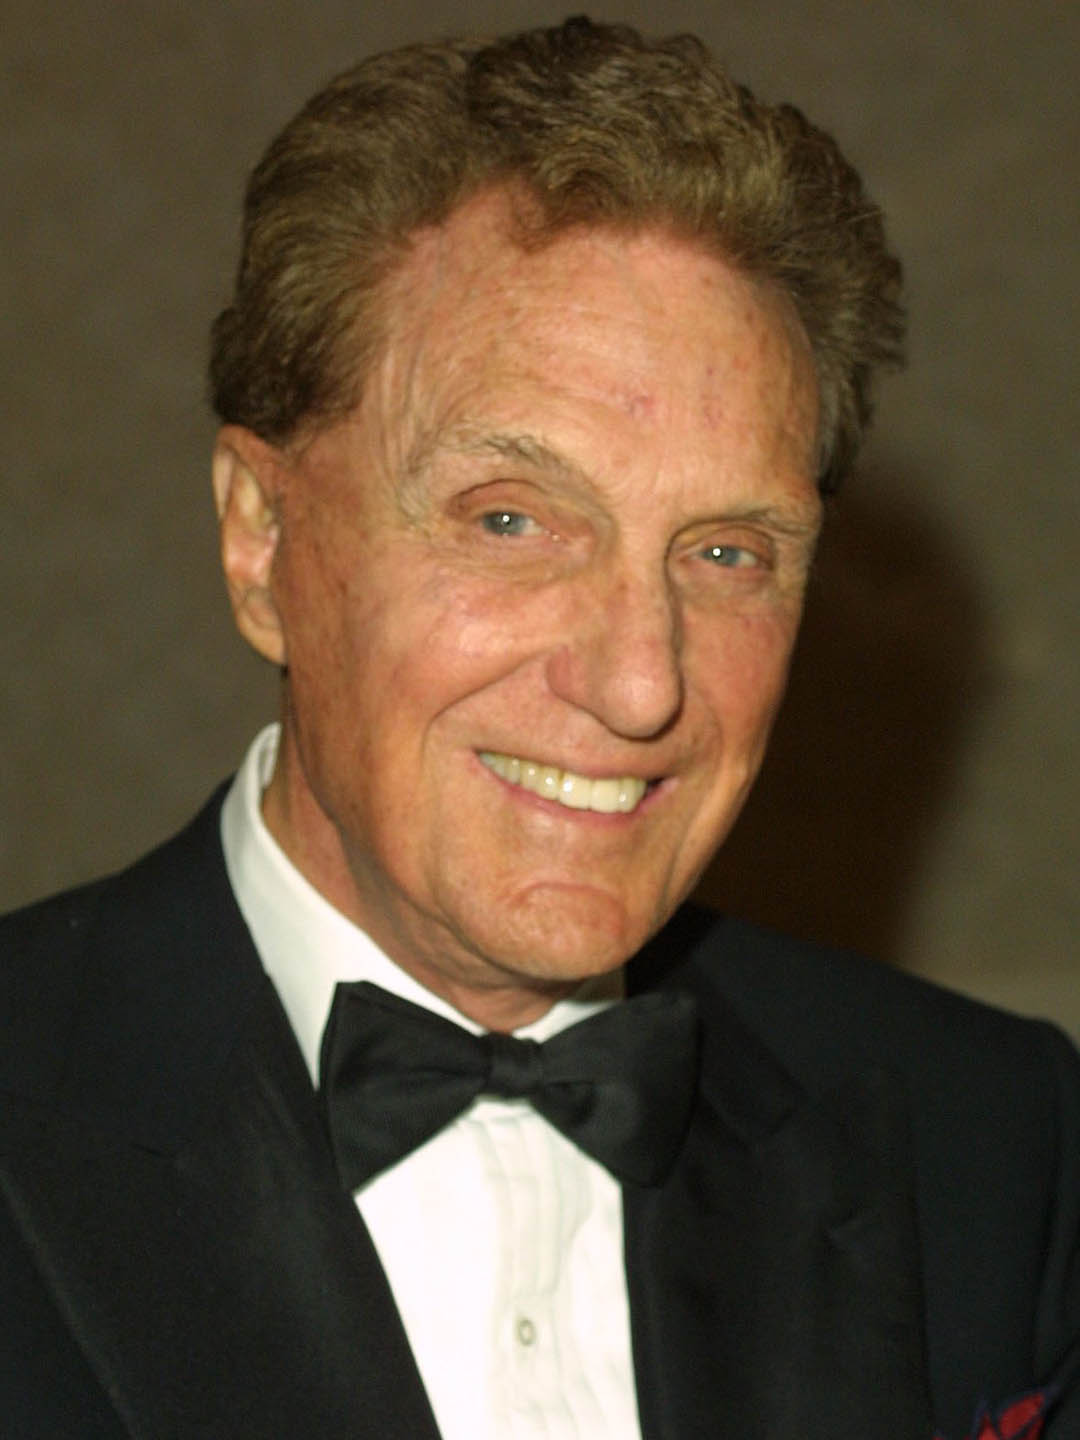 How tall is Robert Stack?